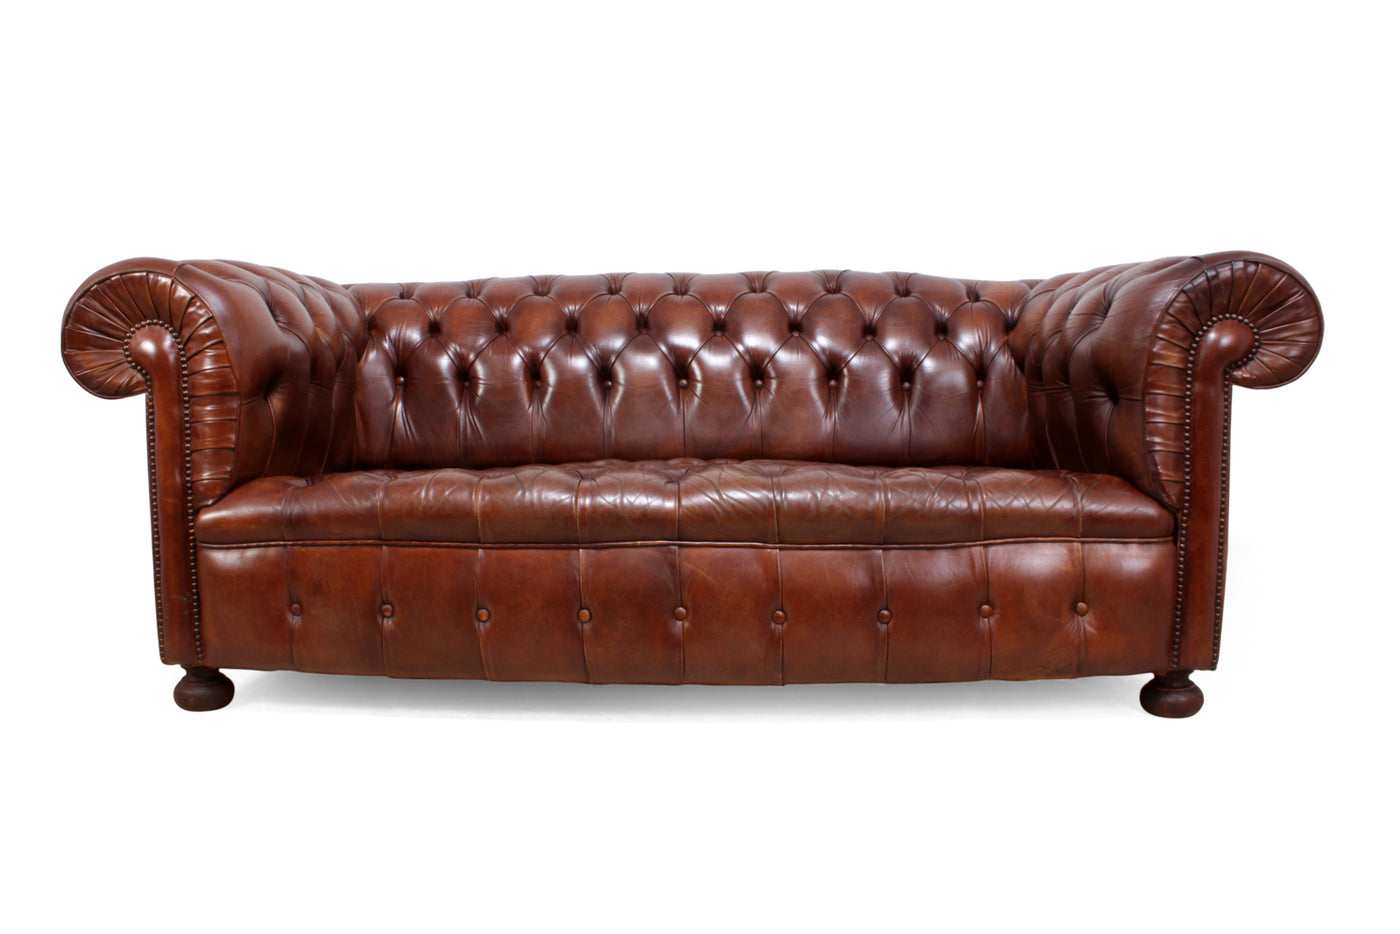 Brown vintage Leather Buttoned Chesterfield